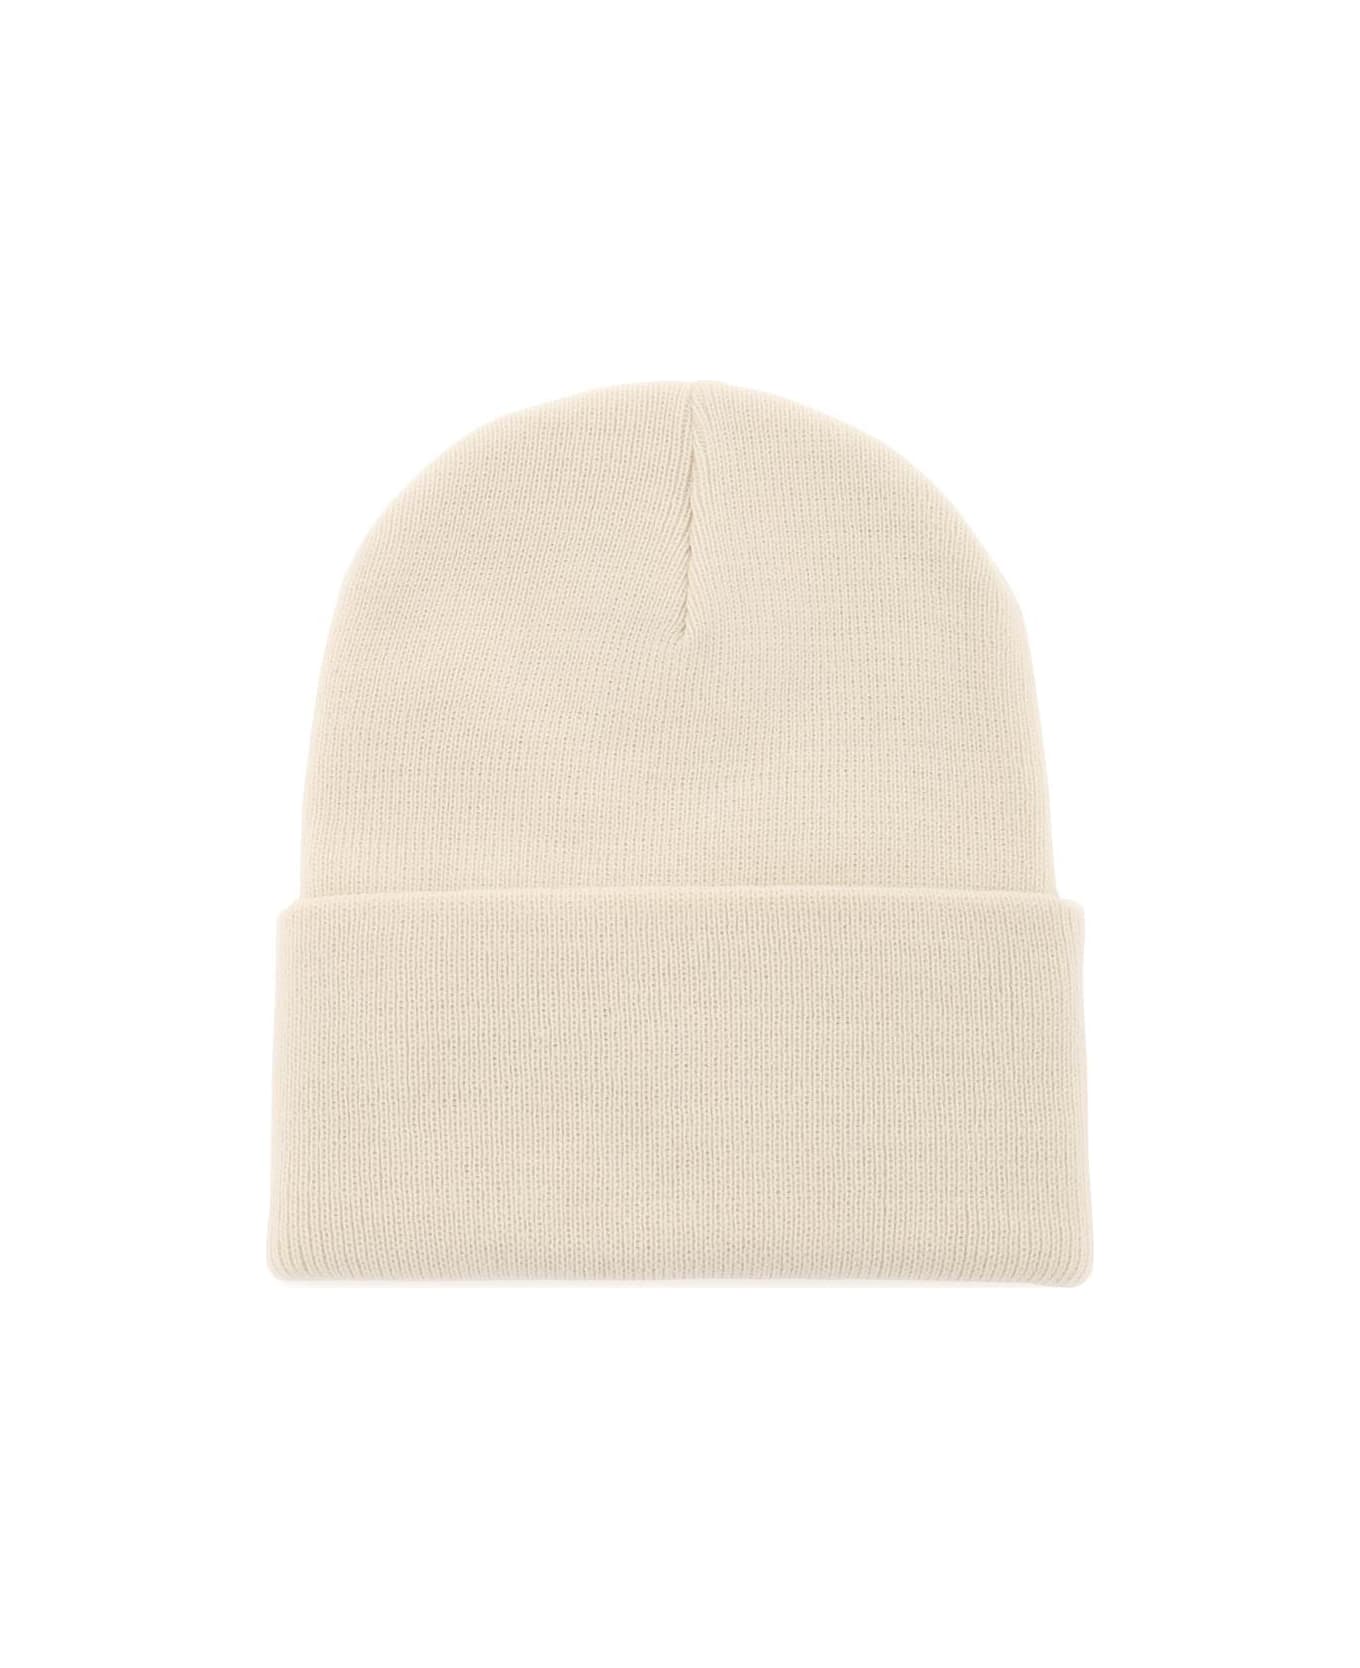 Carhartt Beanie Hat With Logo Patch - Natural